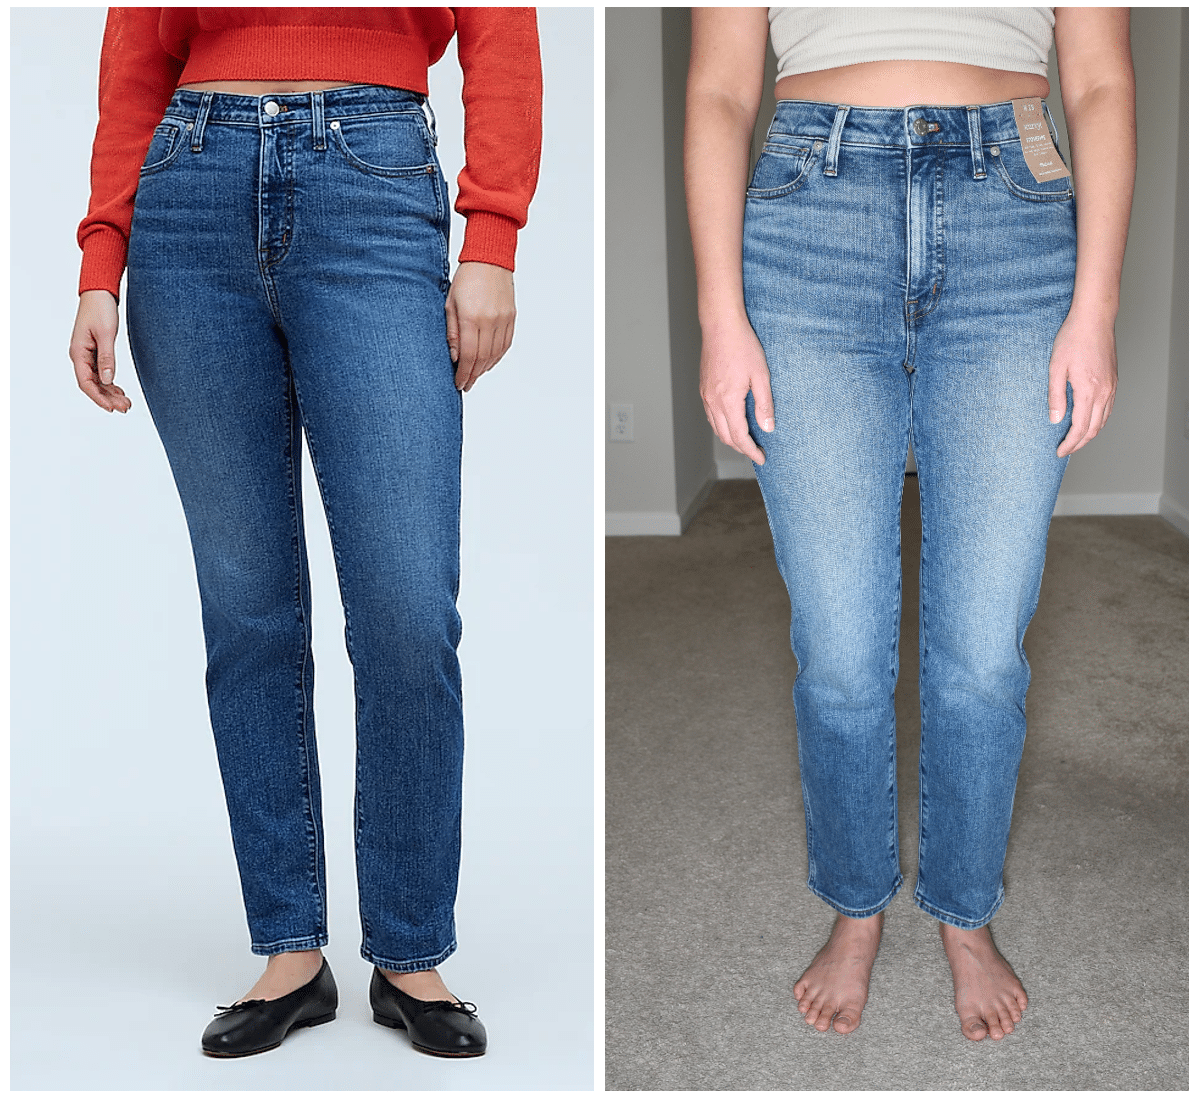 madewell curvy stovepipe jeans comparison